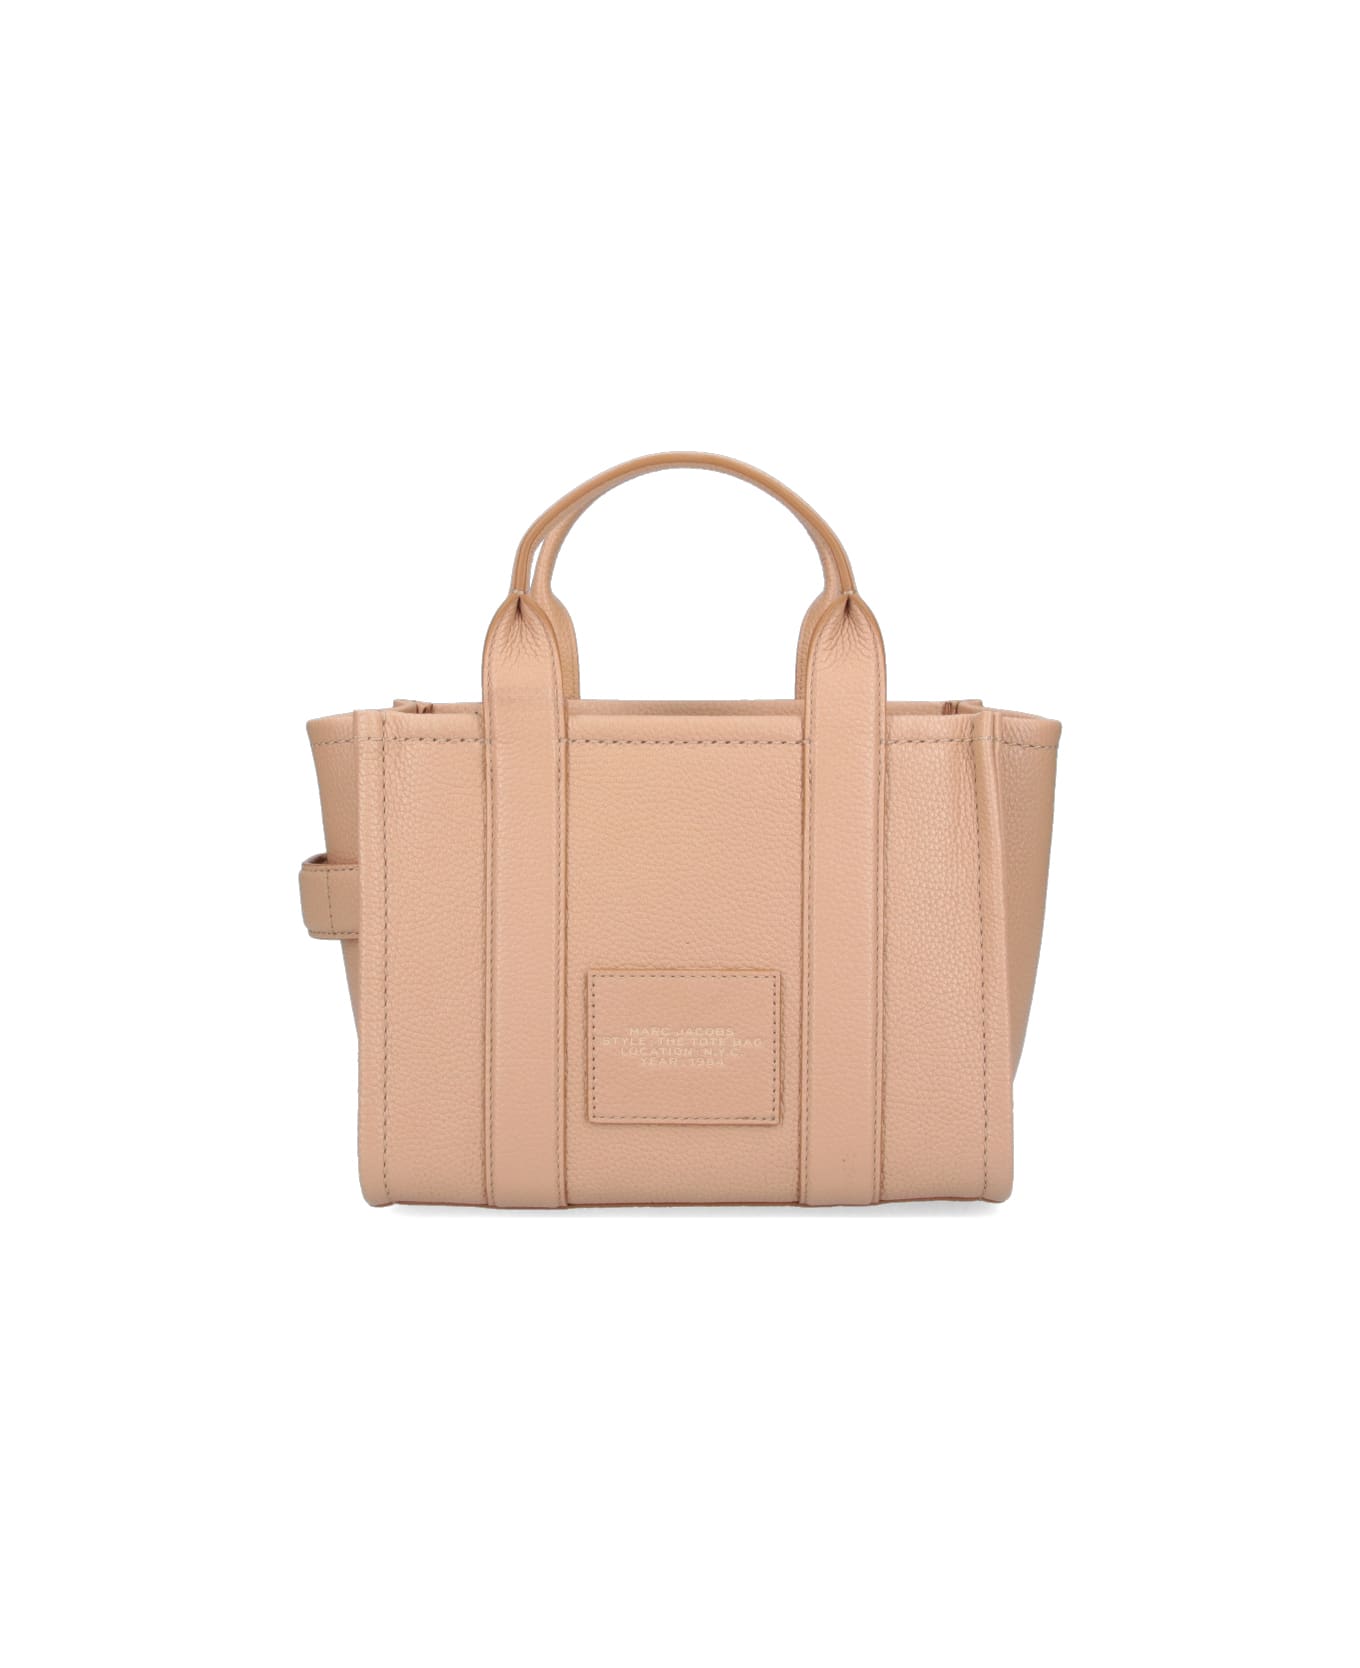 Marc Jacobs "the Small Tote" Bag - Beige